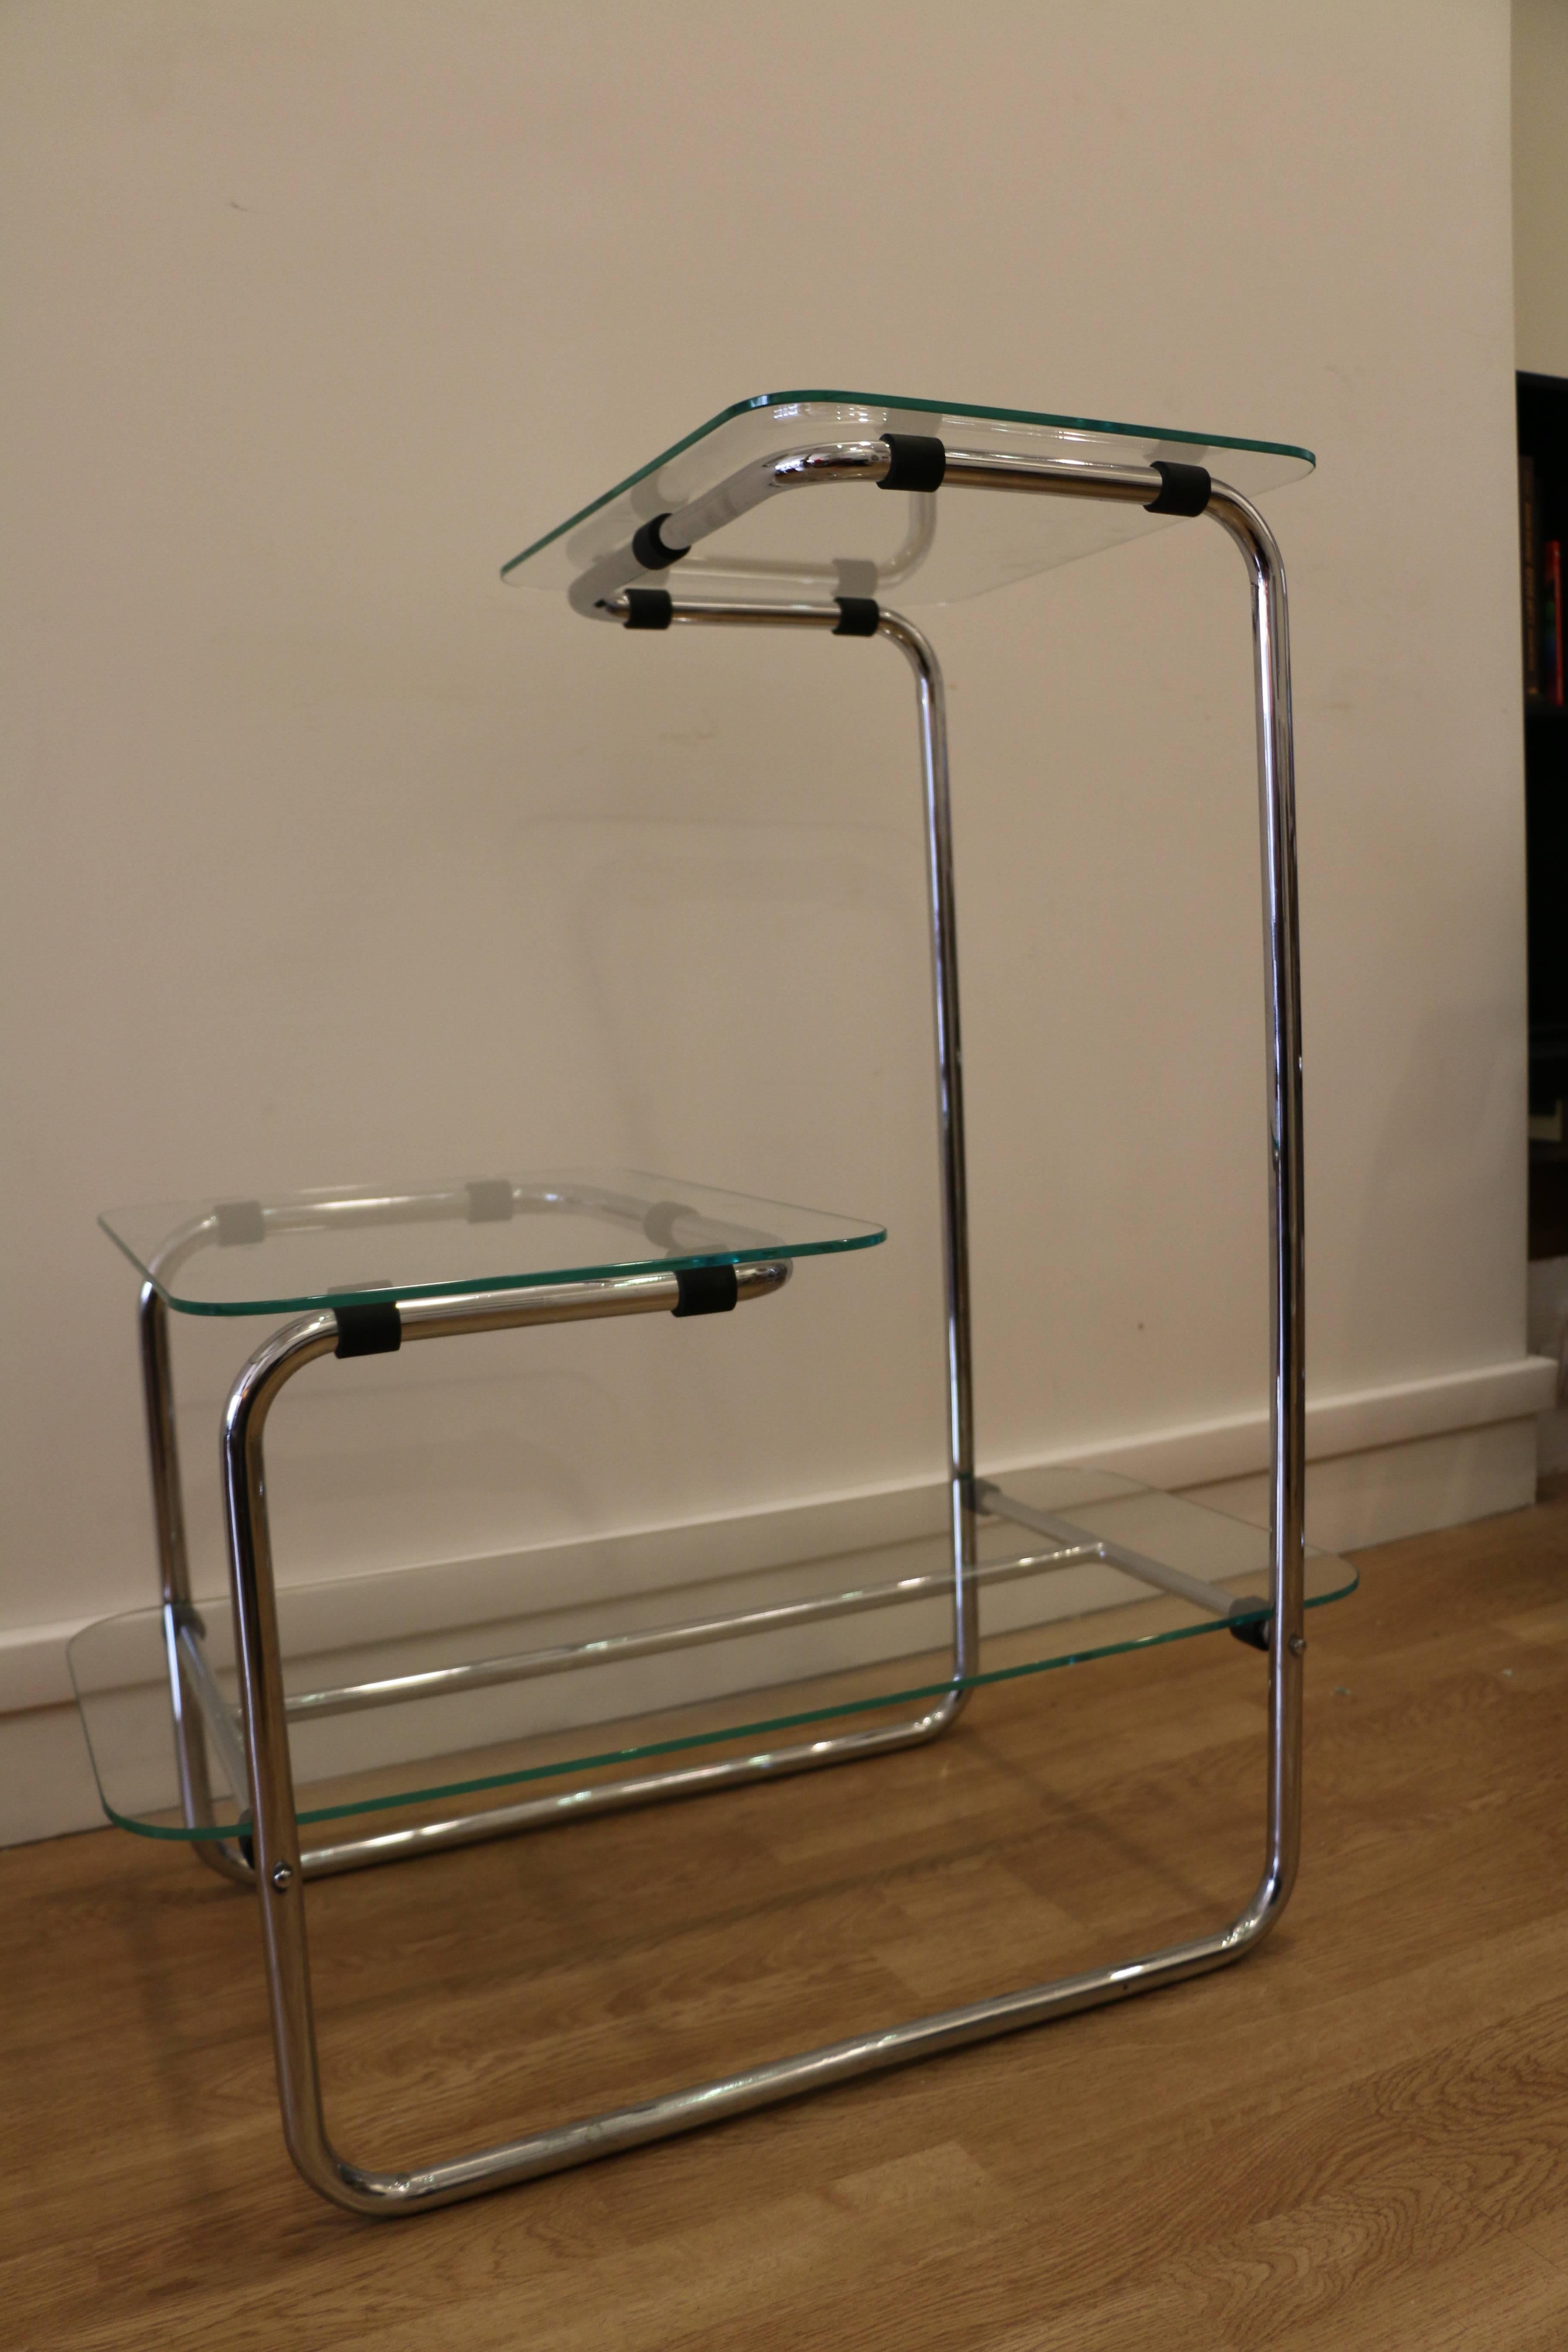 Shelves by Emile Guillot, circa 1930. These shelves have three levels with three glass panels on chromium tubular frame.
This model is quite original and rare as it has straight tubes (H-form) below the bottom glass panel instead of a frame shape